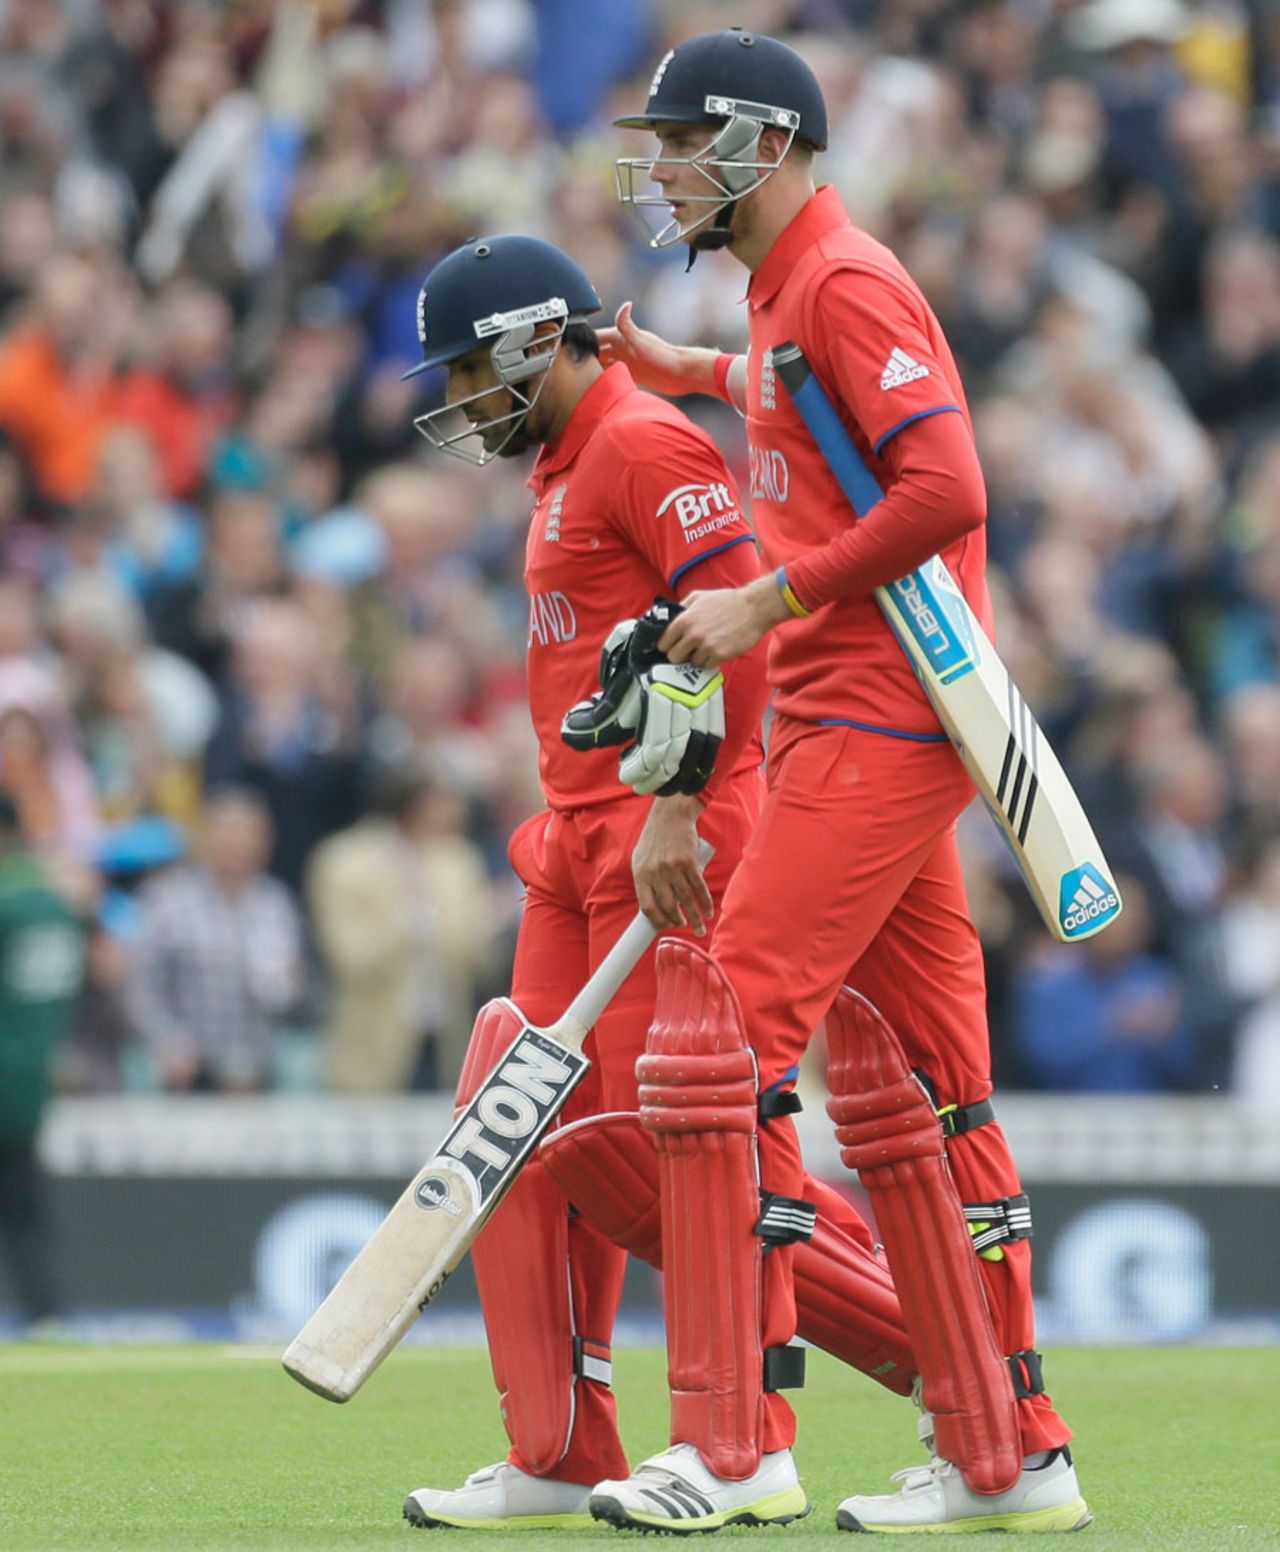 Ravi Bopara and Stuart Broad added 39 off just 13 balls to finish the England innings, England v Sri Lanka, Champions Trophy, Group A, The Oval, June 13, 2013